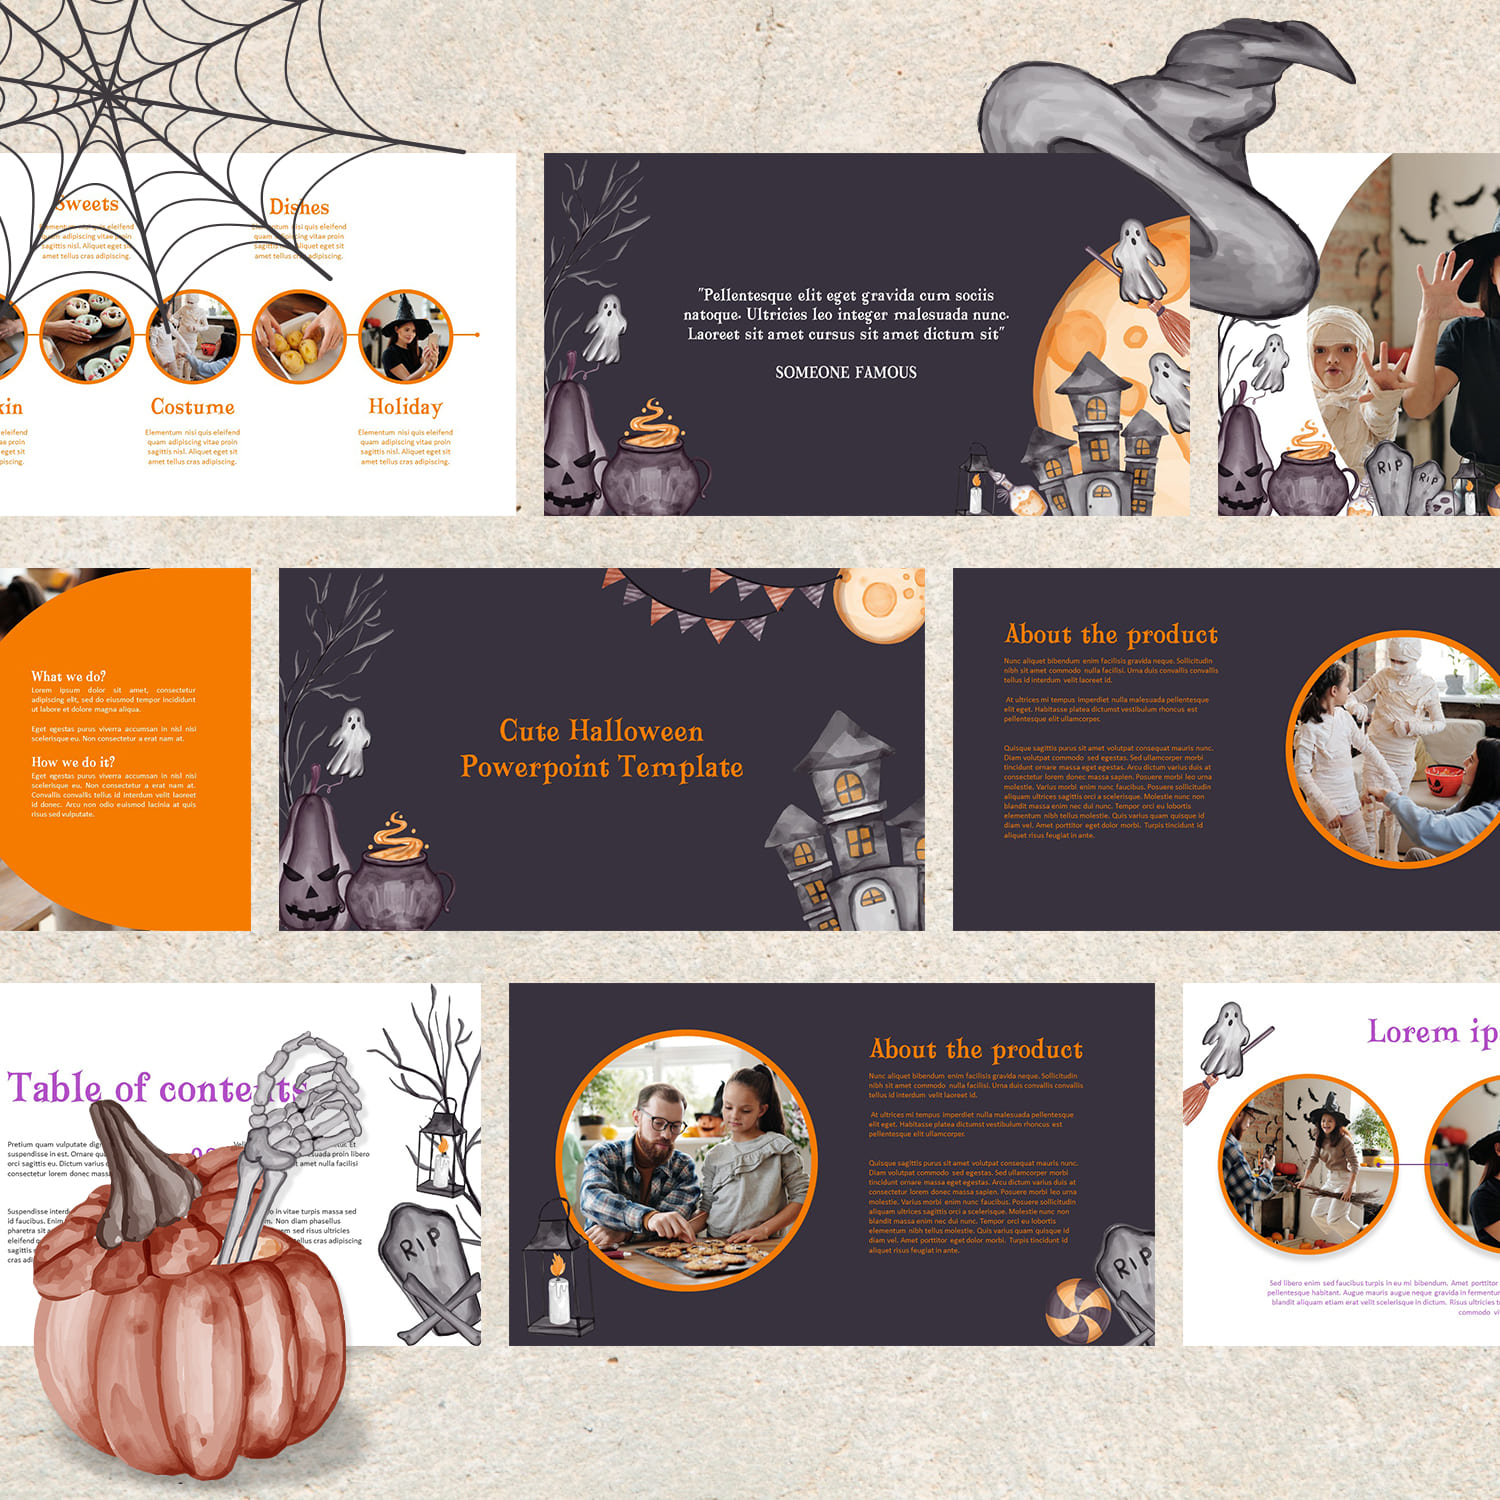 cute halloween powerpoint template cover.